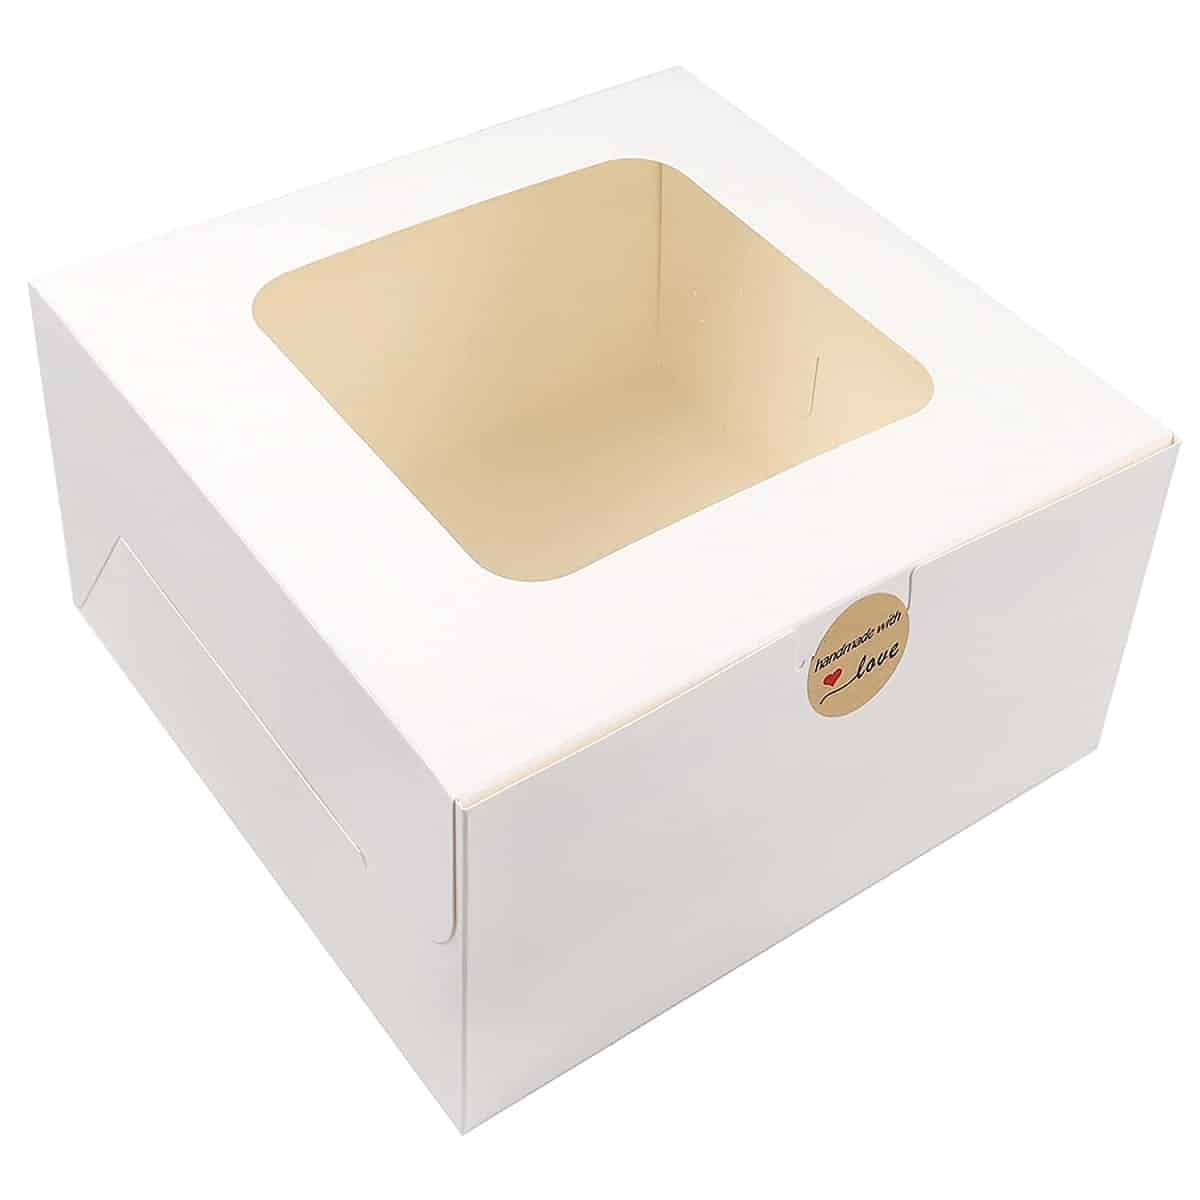 Image of white cake box with a sticker.